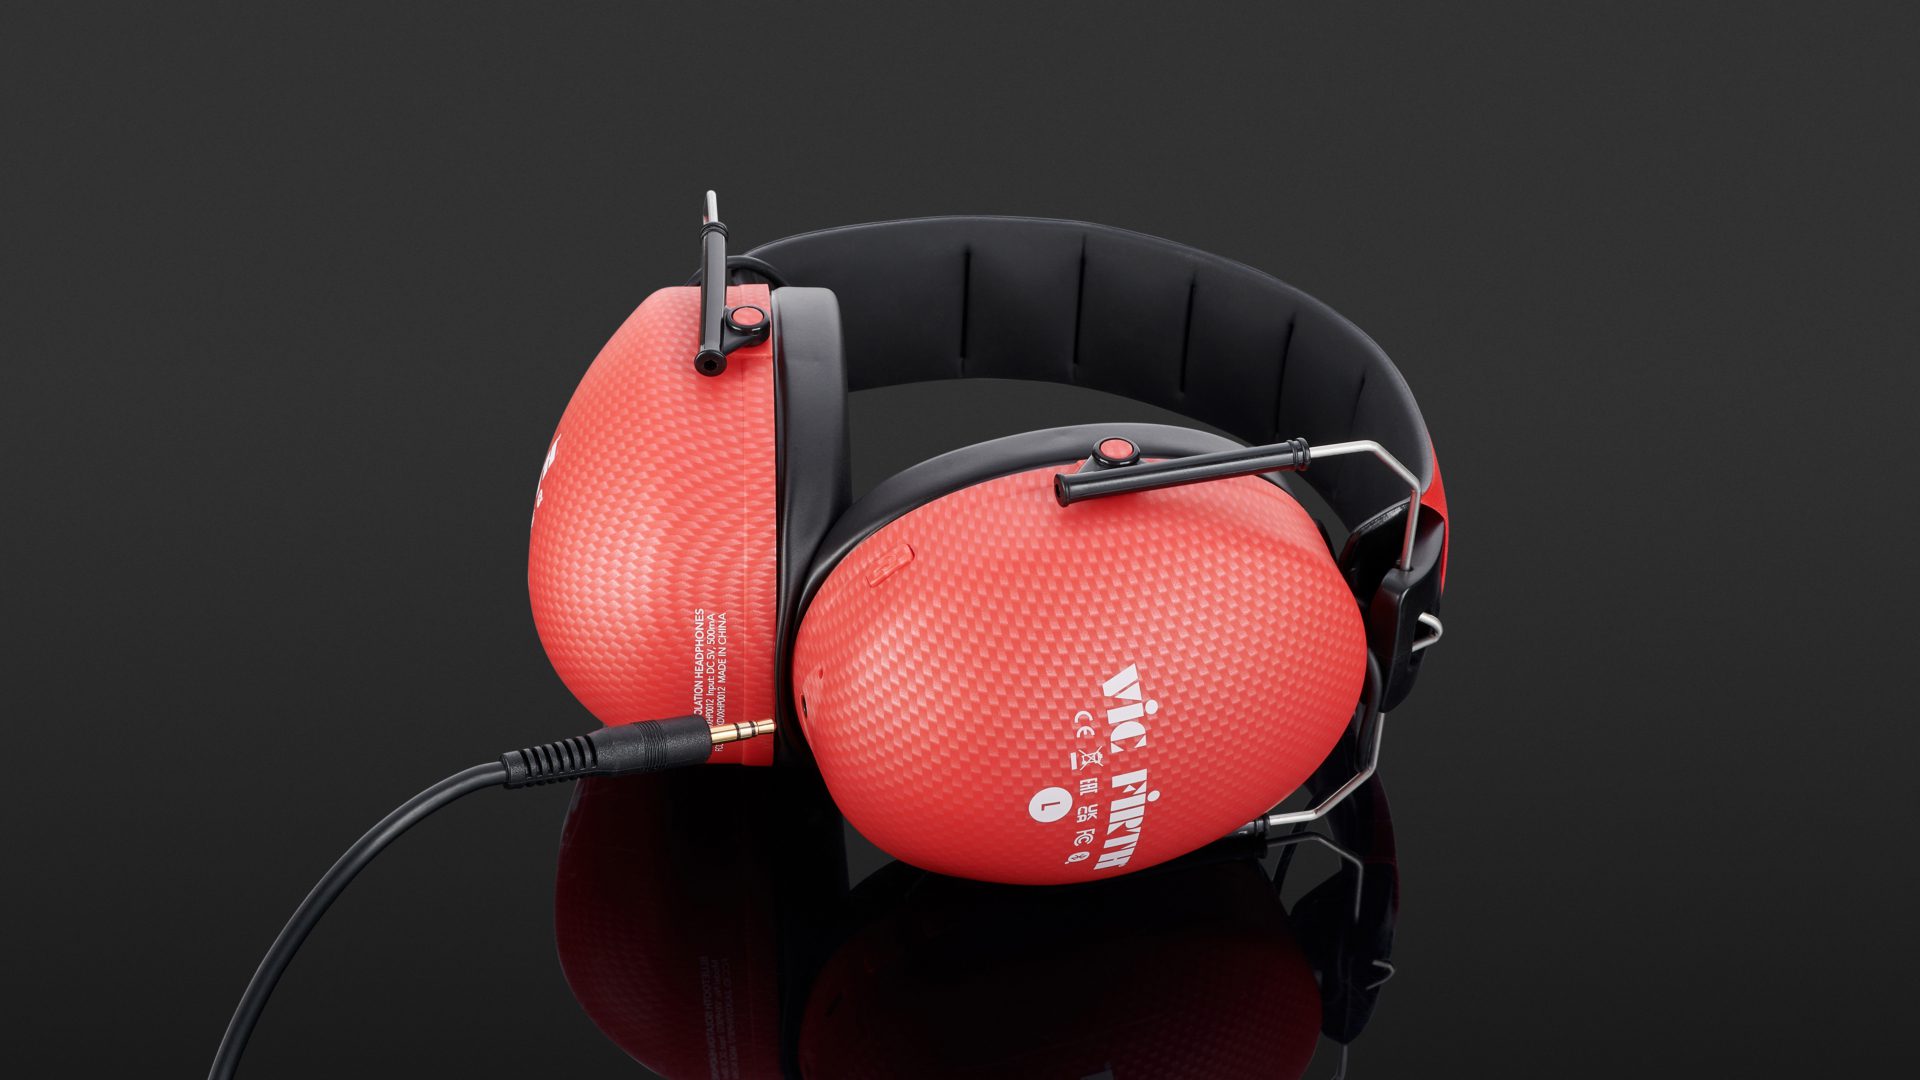 Vic Firth Bluetooth Isolation Headphones VXHP0012 Review